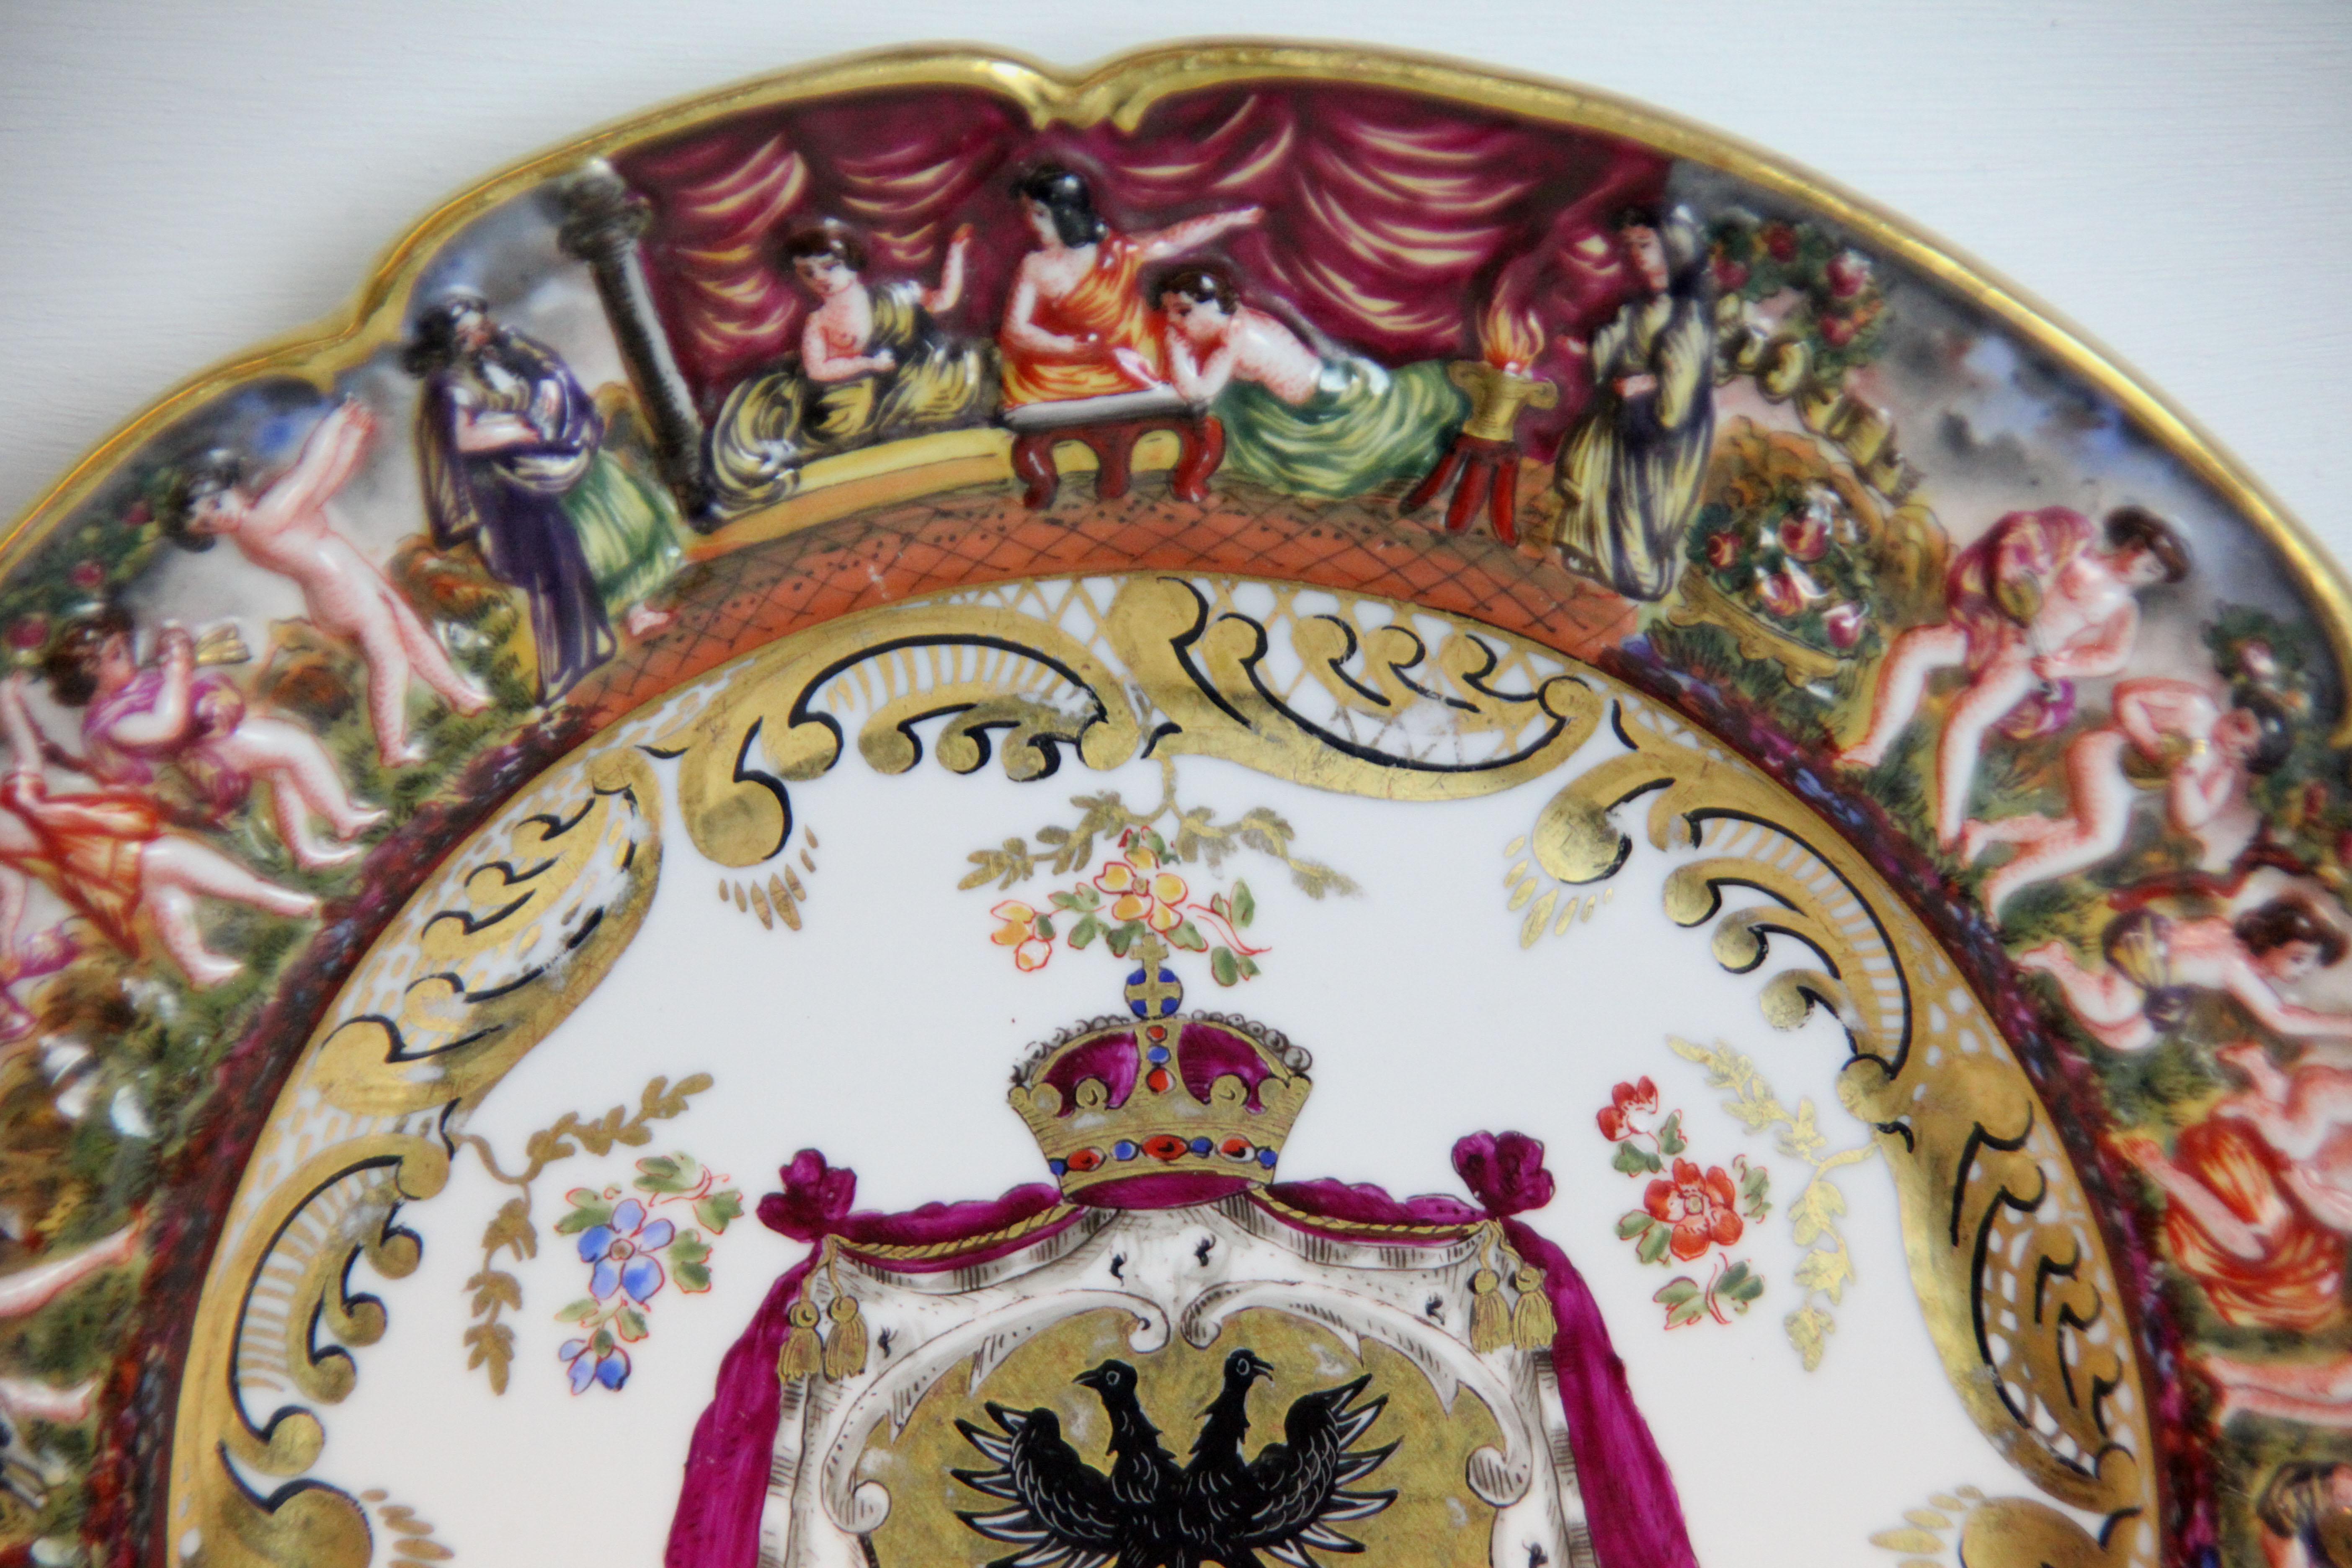 19th century Capodimonte plate, with shaped rim, border featuring classical scenes, the center with coat of arms.